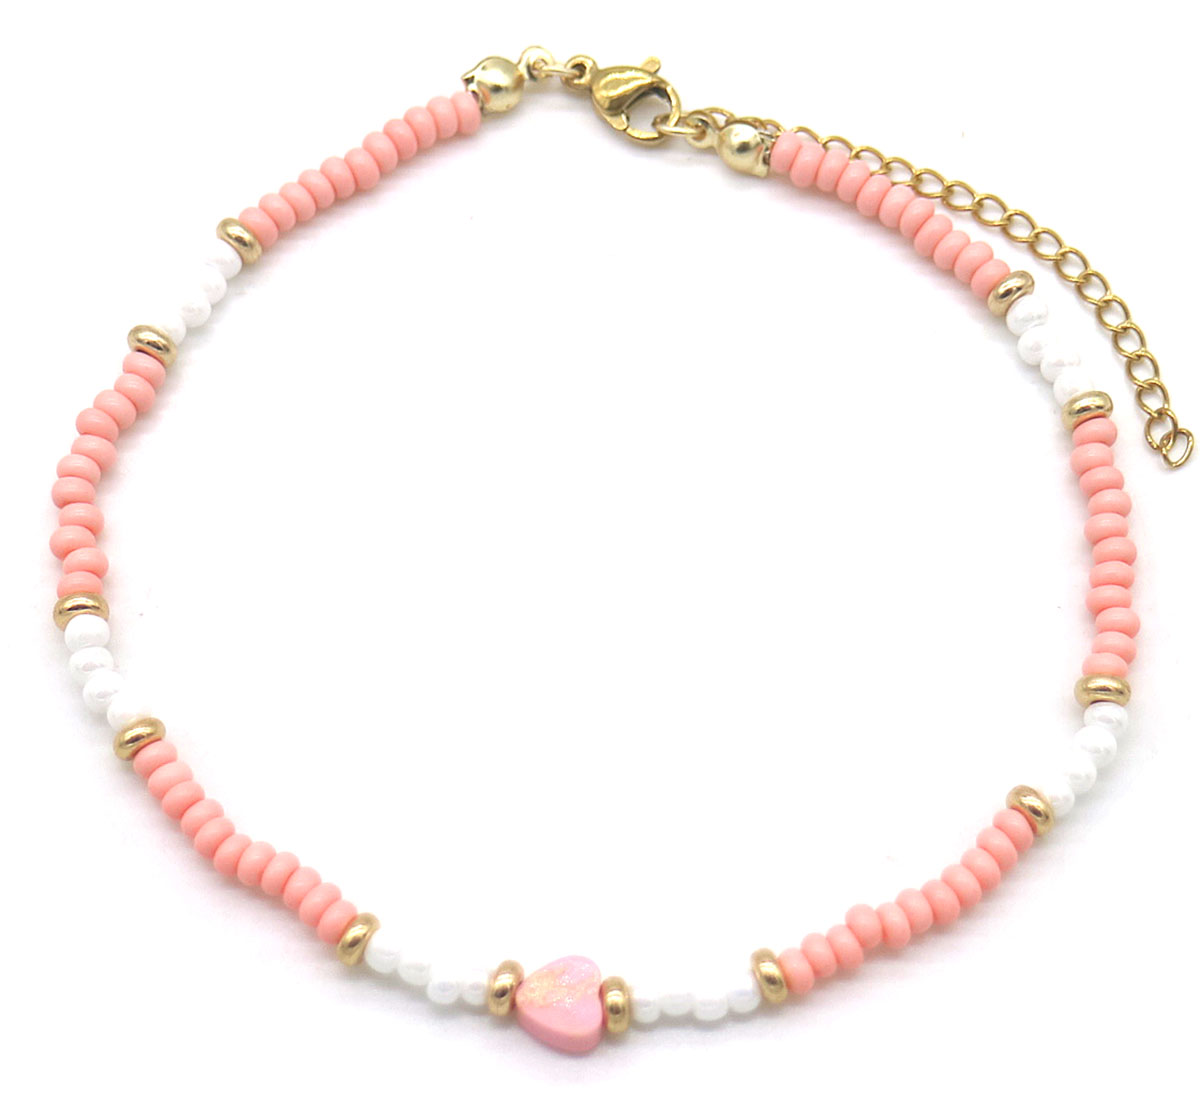 G-D9.1 ANK830-078-2 Anklet Heart Pink